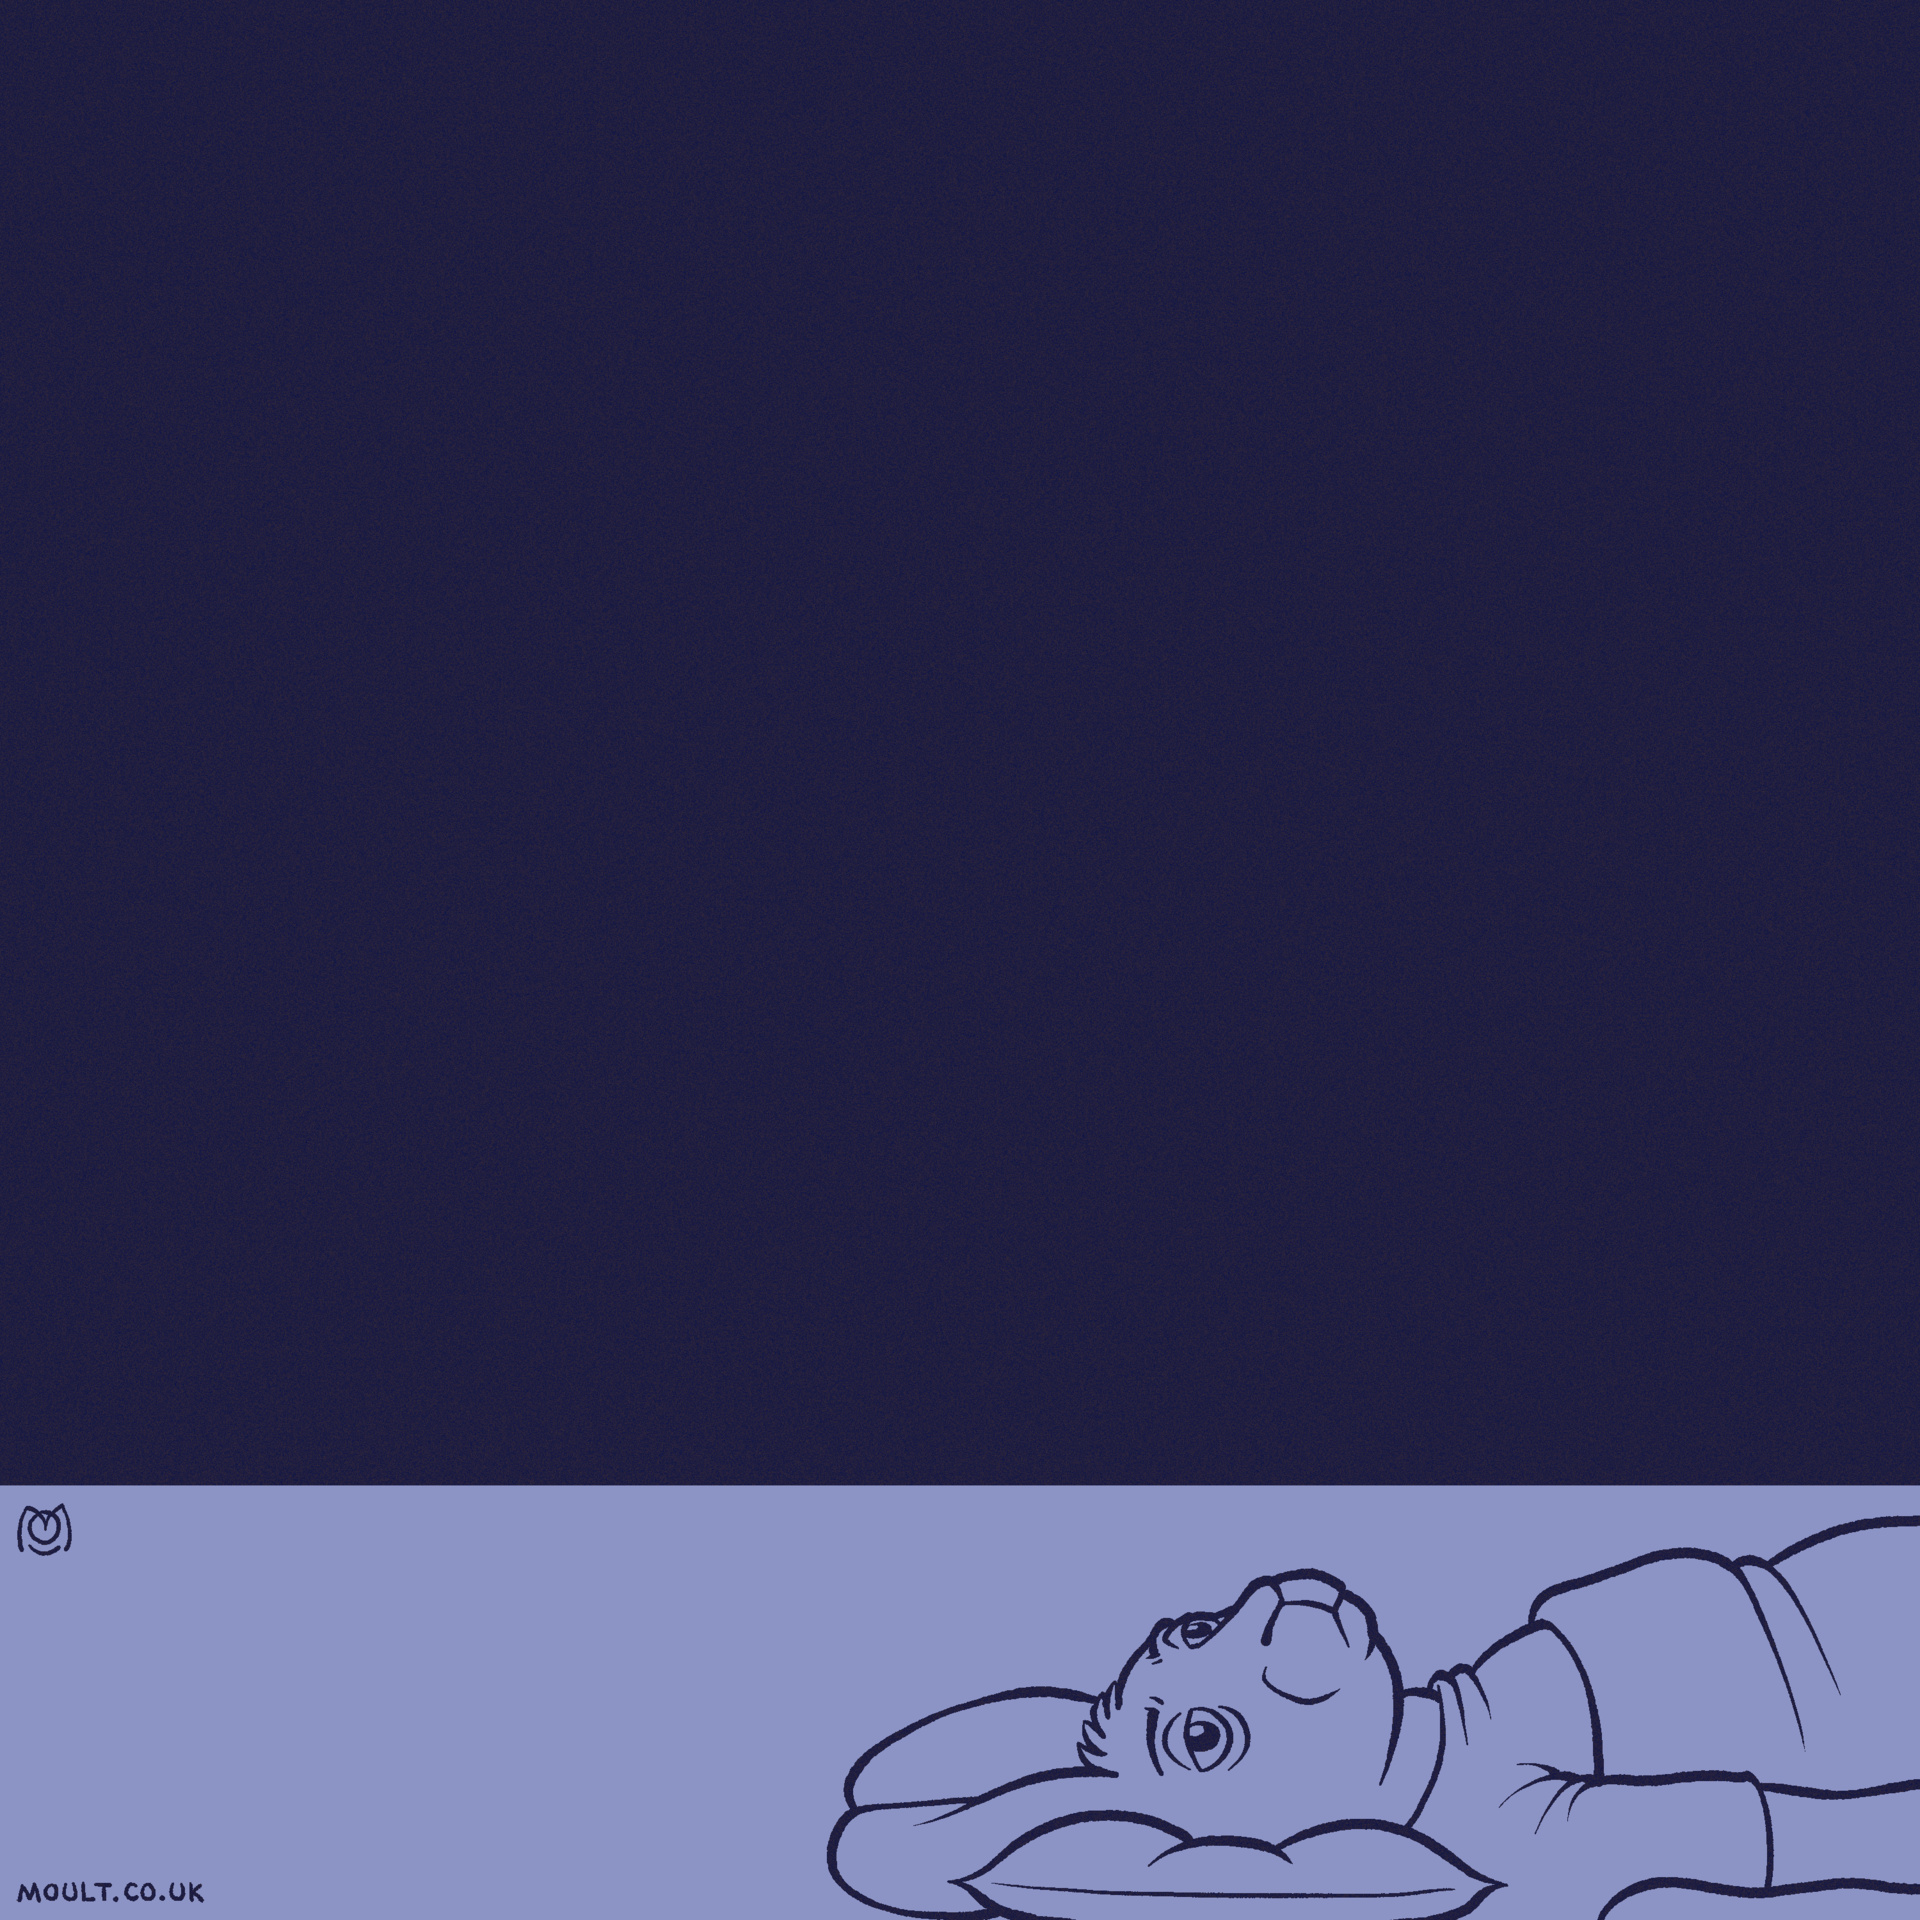 small drawing of edith the rabbit lying awake in bed under a large dark blue field